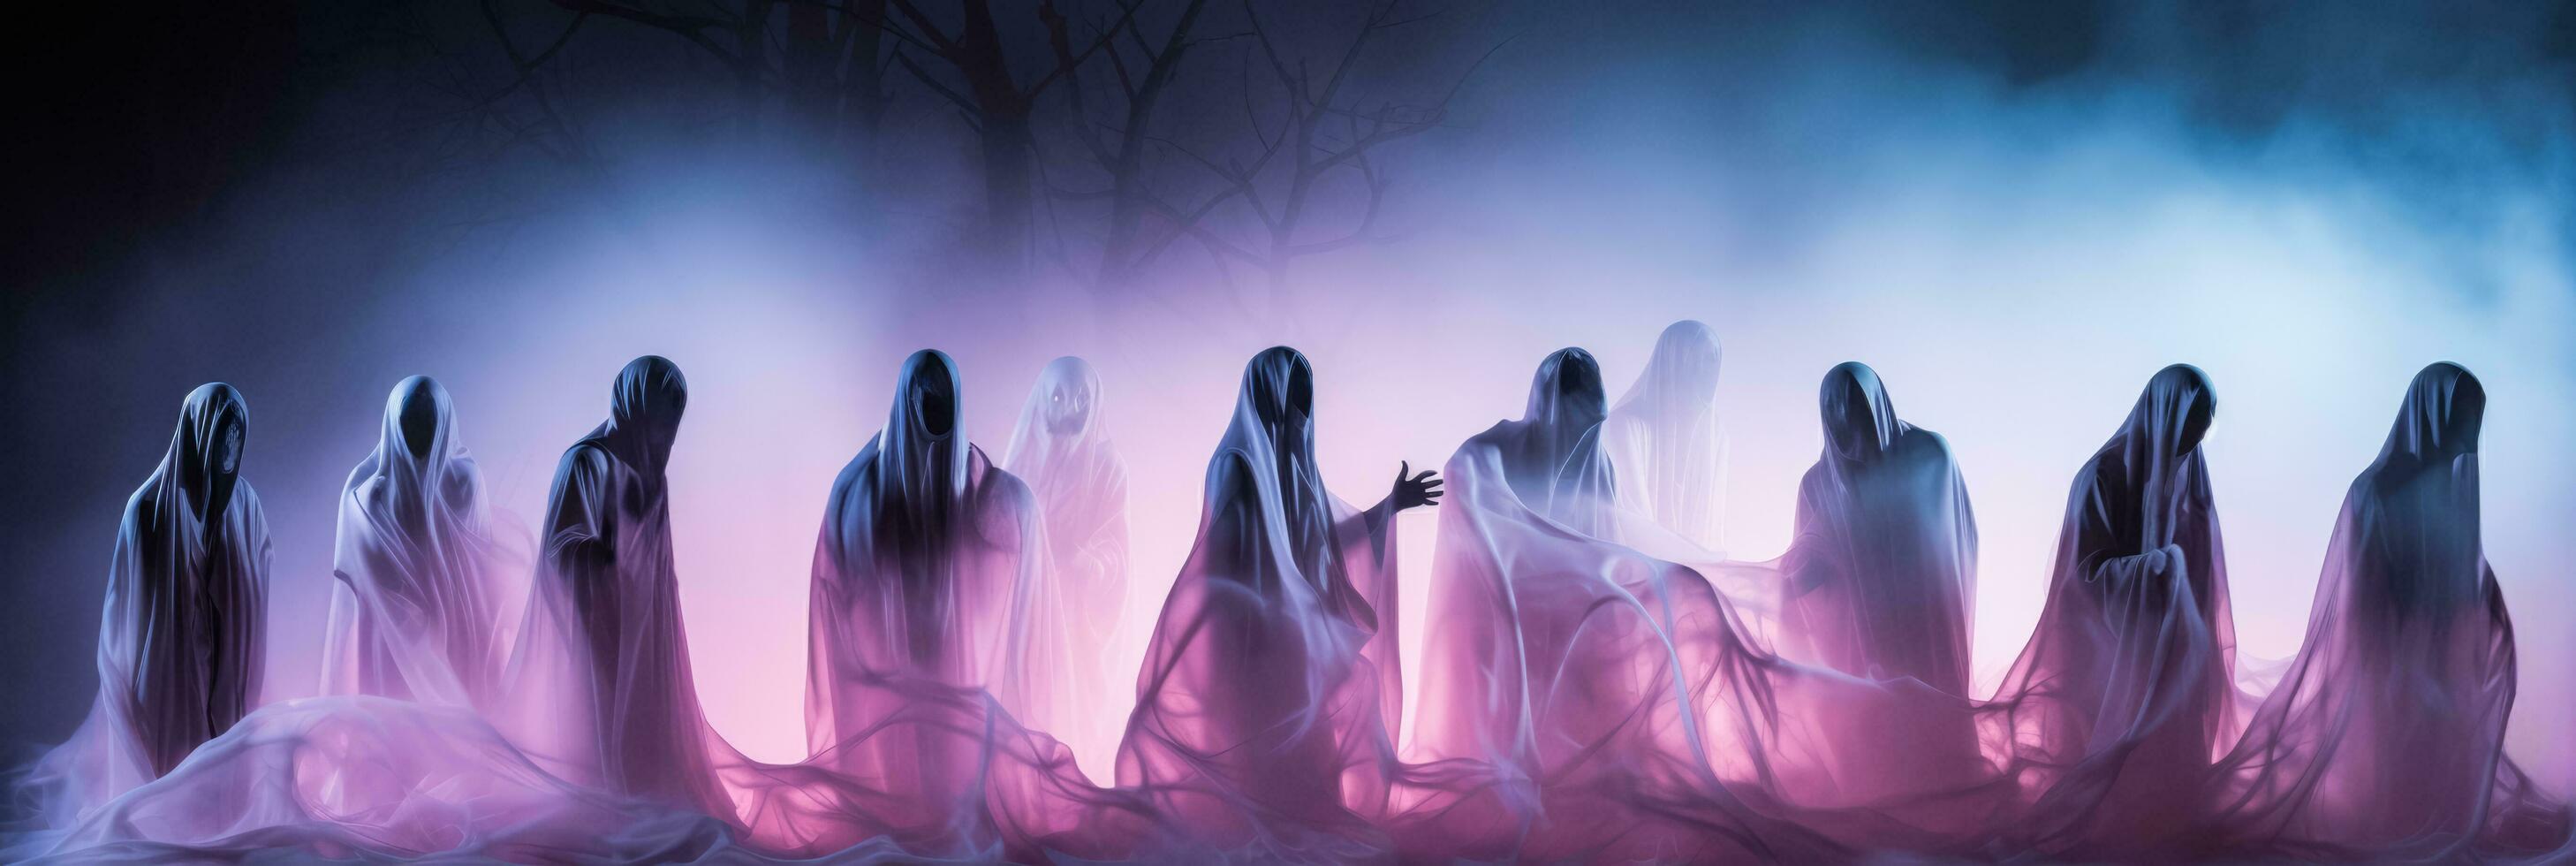 Scary outdoor Halloween lighting featuring ghost figures isolated on a gradient background photo